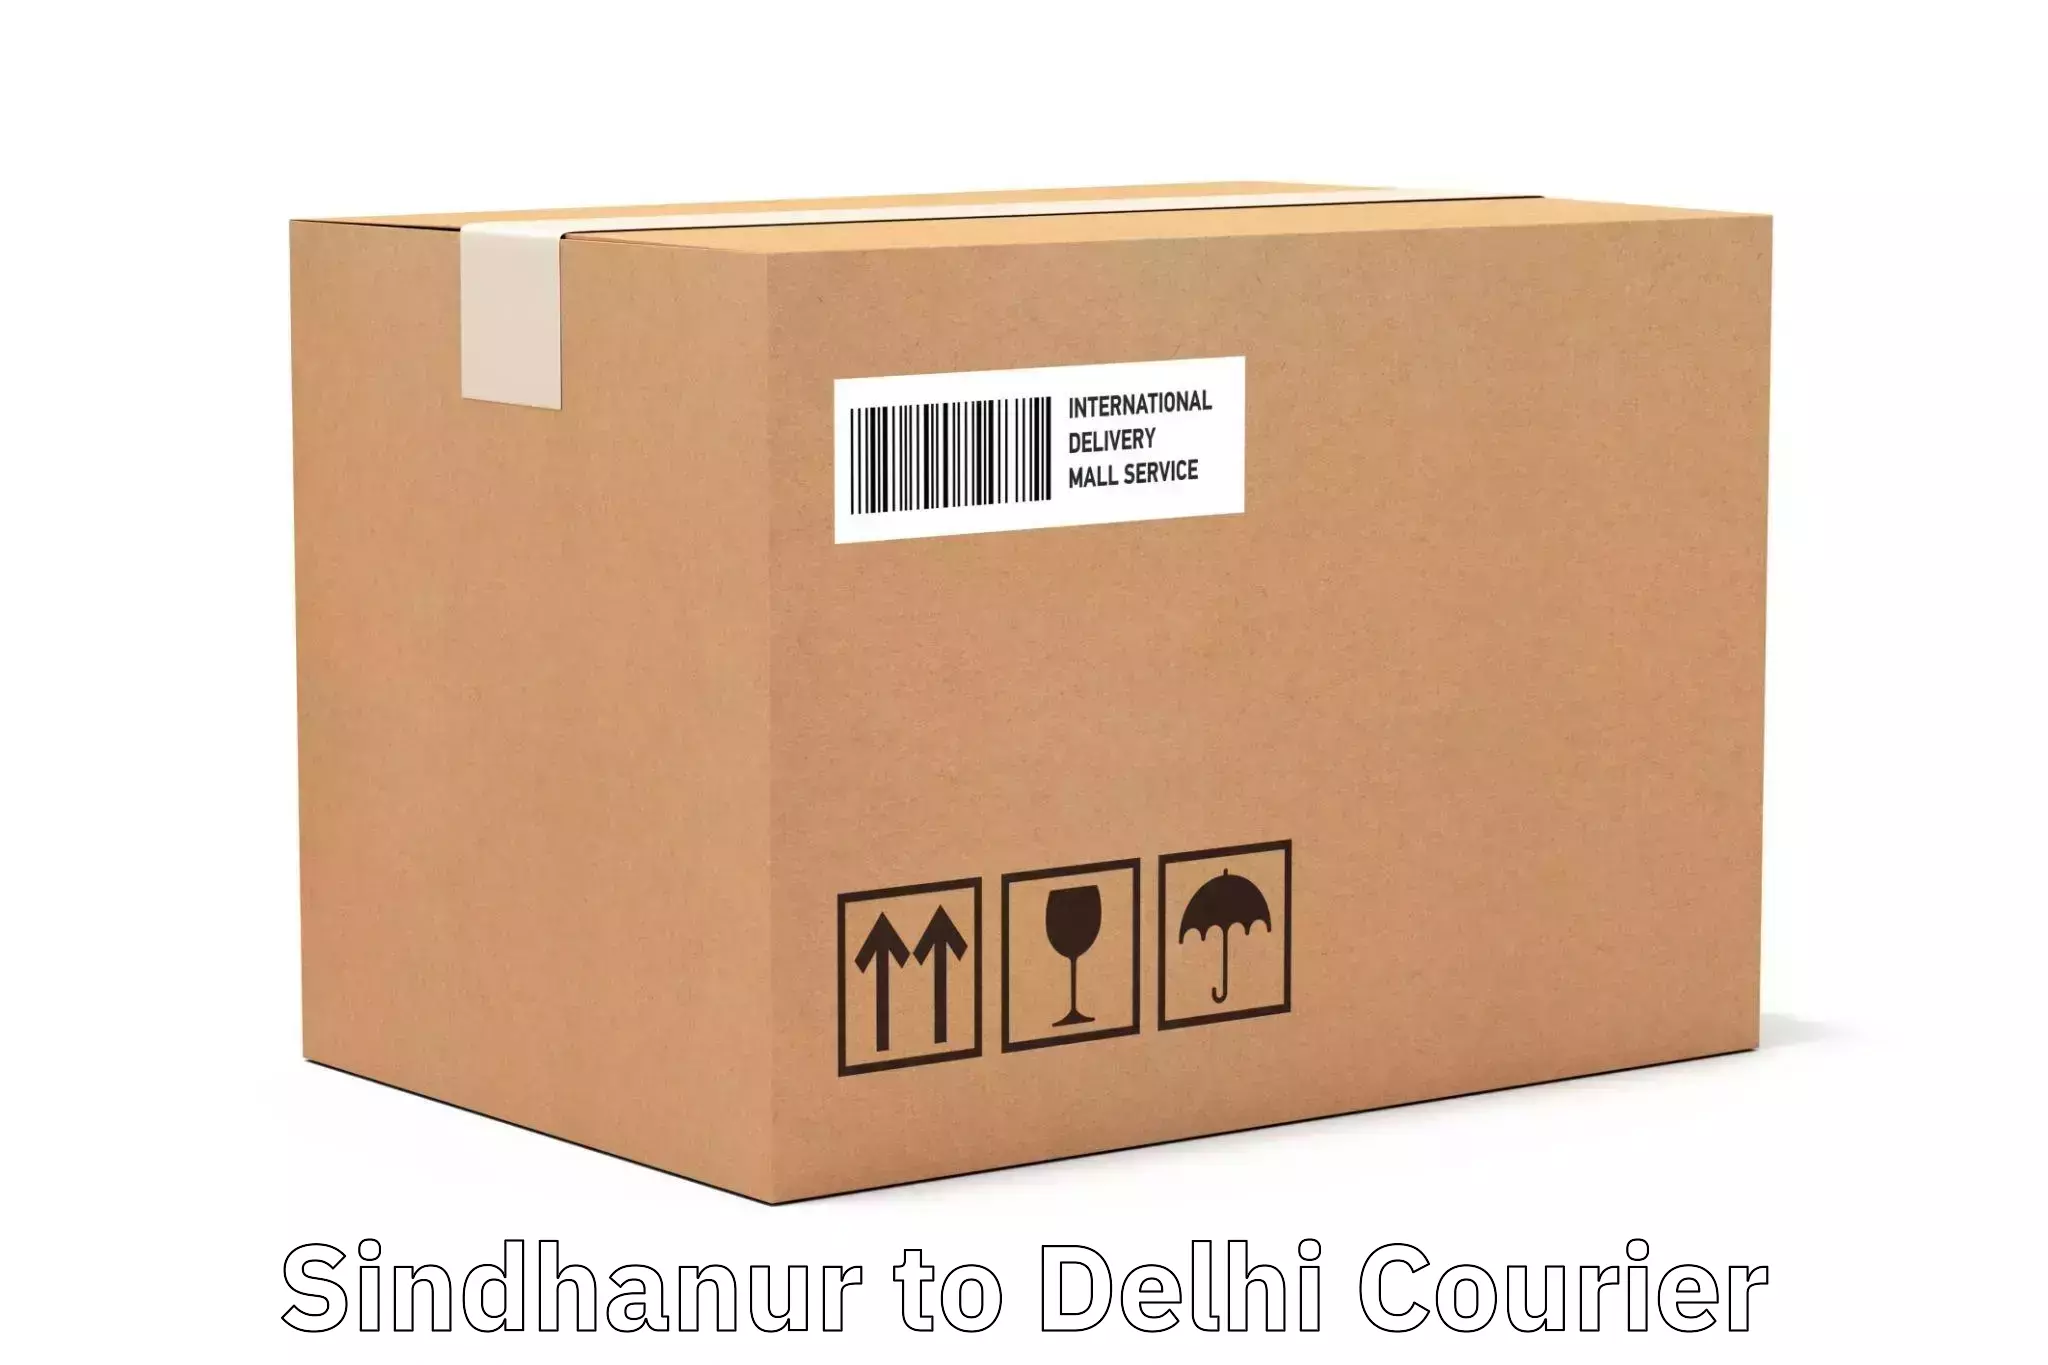 Customizable delivery plans Sindhanur to NIT Delhi